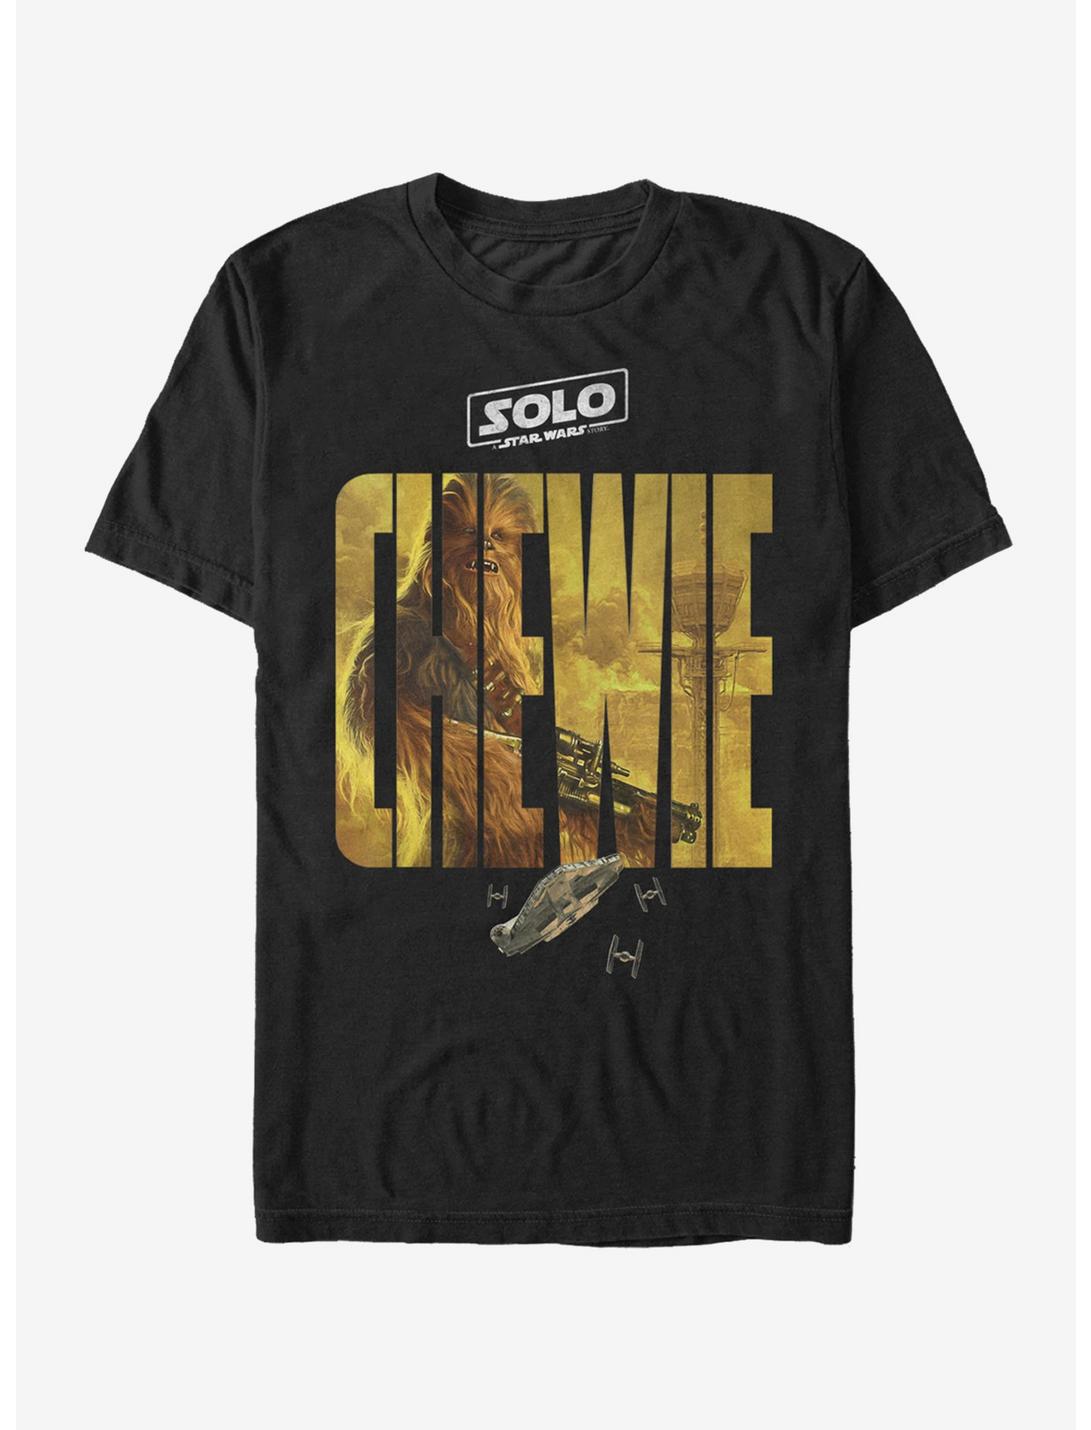 Star Wars Solo A Star Wars Story Chewie Poster T-Shirt, BLACK, hi-res